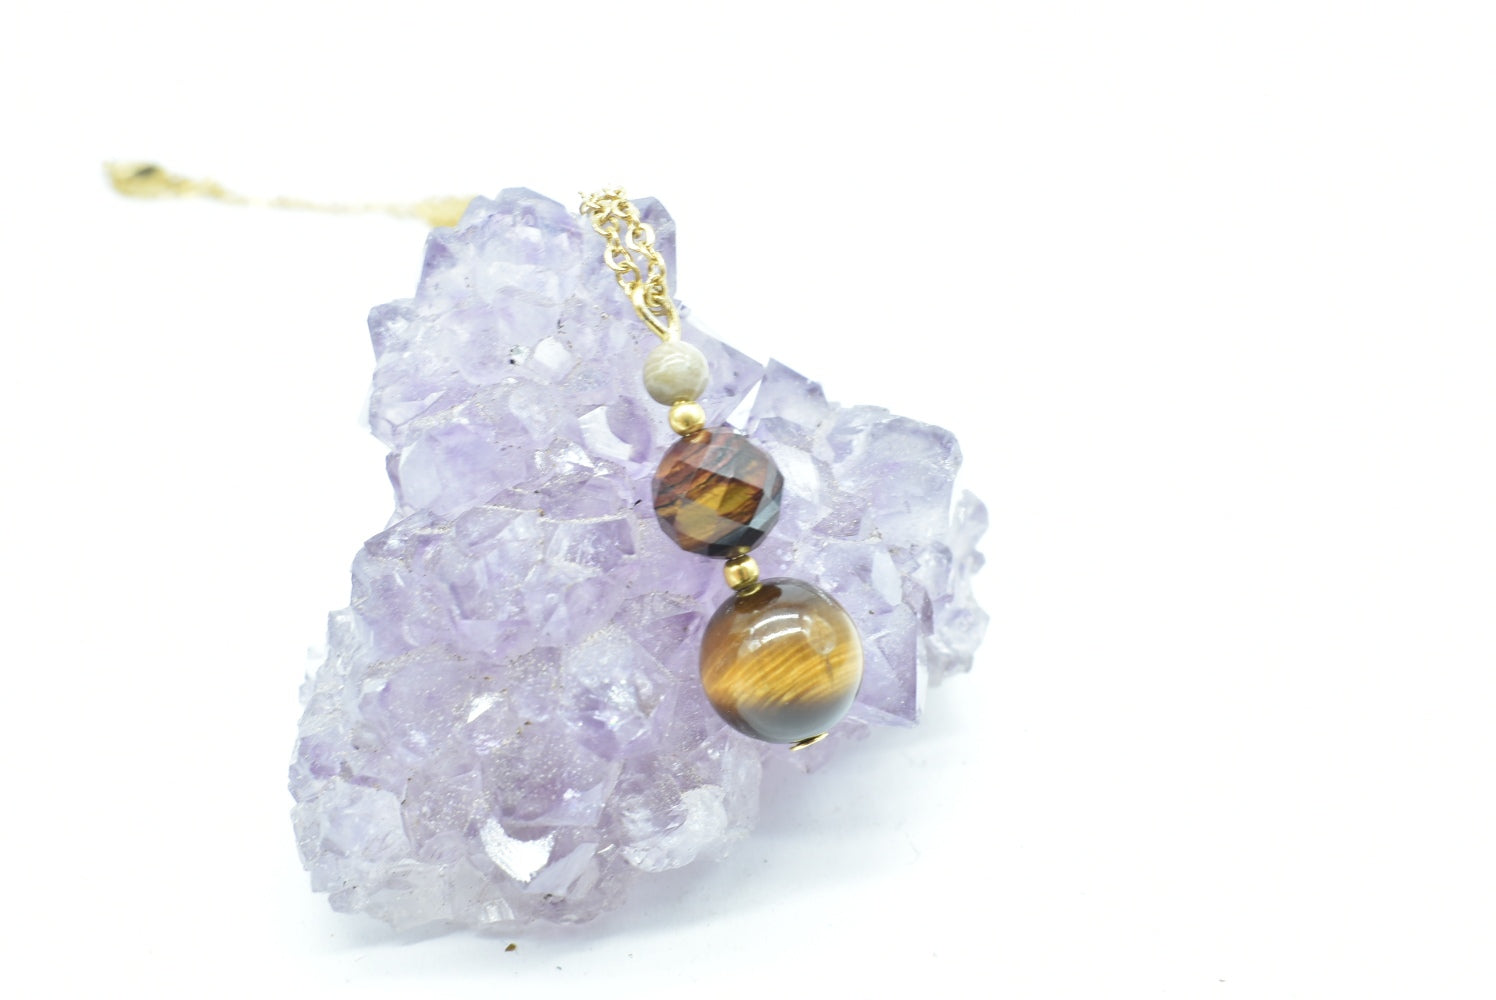 Tiger's Eye and Moonstone beads pendant